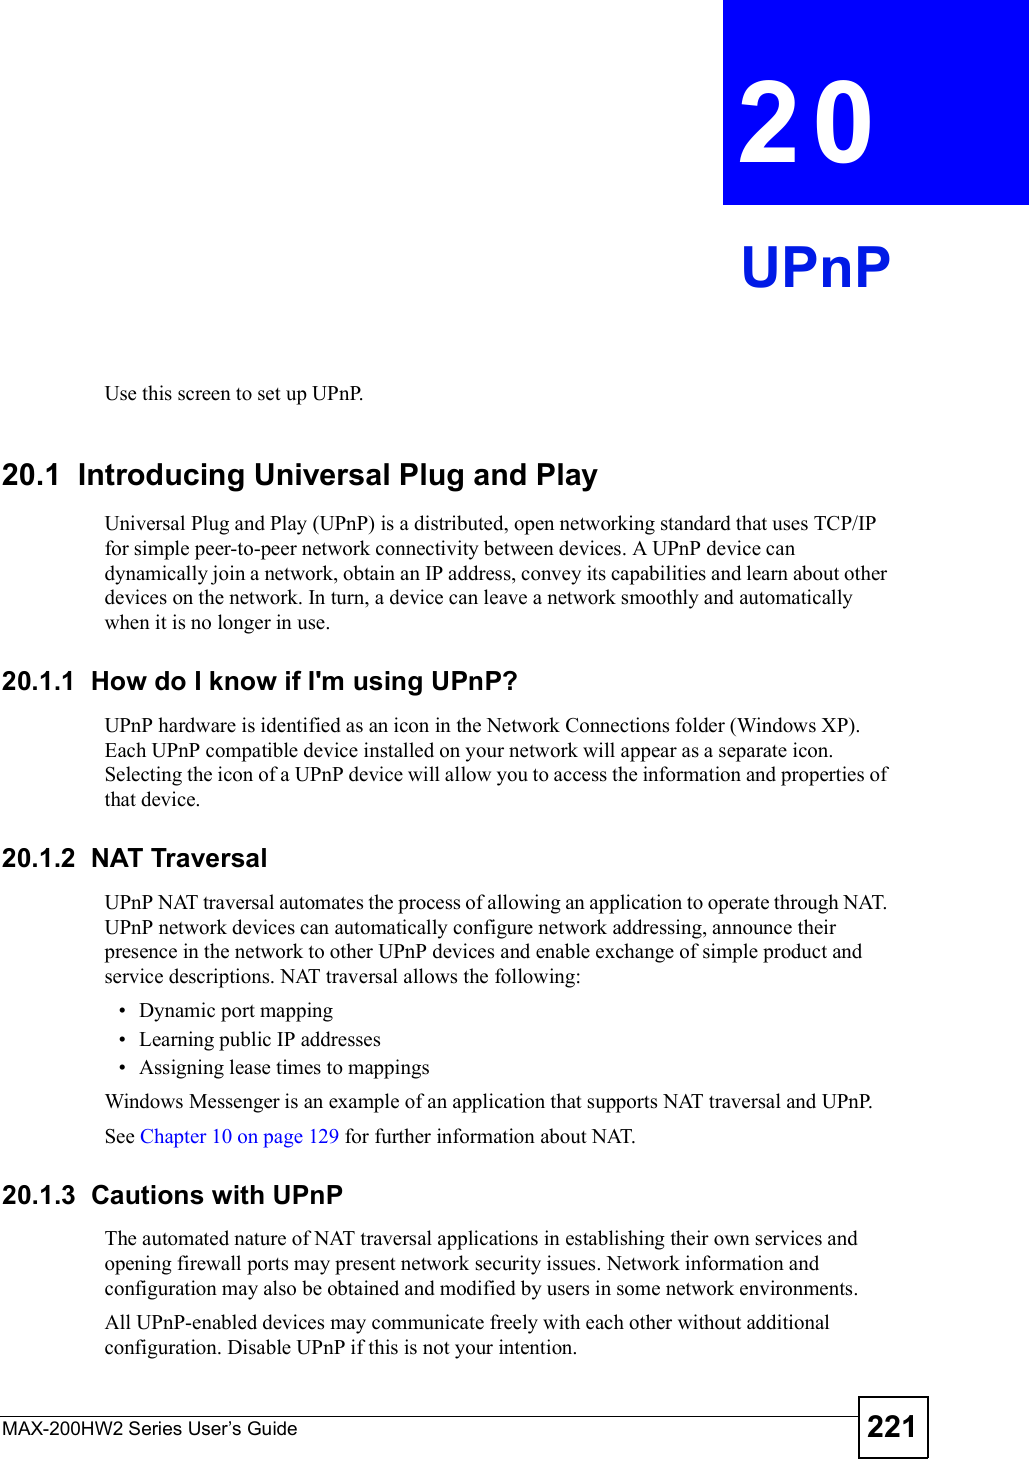 MAX-200HW2 Series User s Guide 221CHAPTER 20UPnPUse this screen to set up UPnP.20.1  Introducing Universal Plug and PlayUniversal Plug and Play (UPnP) is a distributed, open networking standard that uses TCP/IP for simple peer-to-peer network connectivity between devices. A UPnP device can dynamically join a network, obtain an IP address, convey its capabilities and learn about other devices on the network. In turn, a device can leave a network smoothly and automatically when it is no longer in use.20.1.1  How do I know if I&apos;m using UPnP? UPnP hardware is identified as an icon in the Network Connections folder (Windows XP). Each UPnP compatible device installed on your network will appear as a separate icon. Selecting the icon of a UPnP device will allow you to access the information and properties of that device. 20.1.2  NAT TraversalUPnP NAT traversal automates the process of allowing an application to operate through NAT. UPnP network devices can automatically configure network addressing, announce their presence in the network to other UPnP devices and enable exchange of simple product and service descriptions. NAT traversal allows the following: Dynamic port mapping Learning public IP addresses Assigning lease times to mappingsWindows Messenger is an example of an application that supports NAT traversal and UPnP. See Chapter 10 on page 129 for further information about NAT.20.1.3  Cautions with UPnPThe automated nature of NAT traversal applications in establishing their own services and opening firewall ports may present network security issues. Network information and configuration may also be obtained and modified by users in some network environments. All UPnP-enabled devices may communicate freely with each other without additional configuration. Disable UPnP if this is not your intention. 